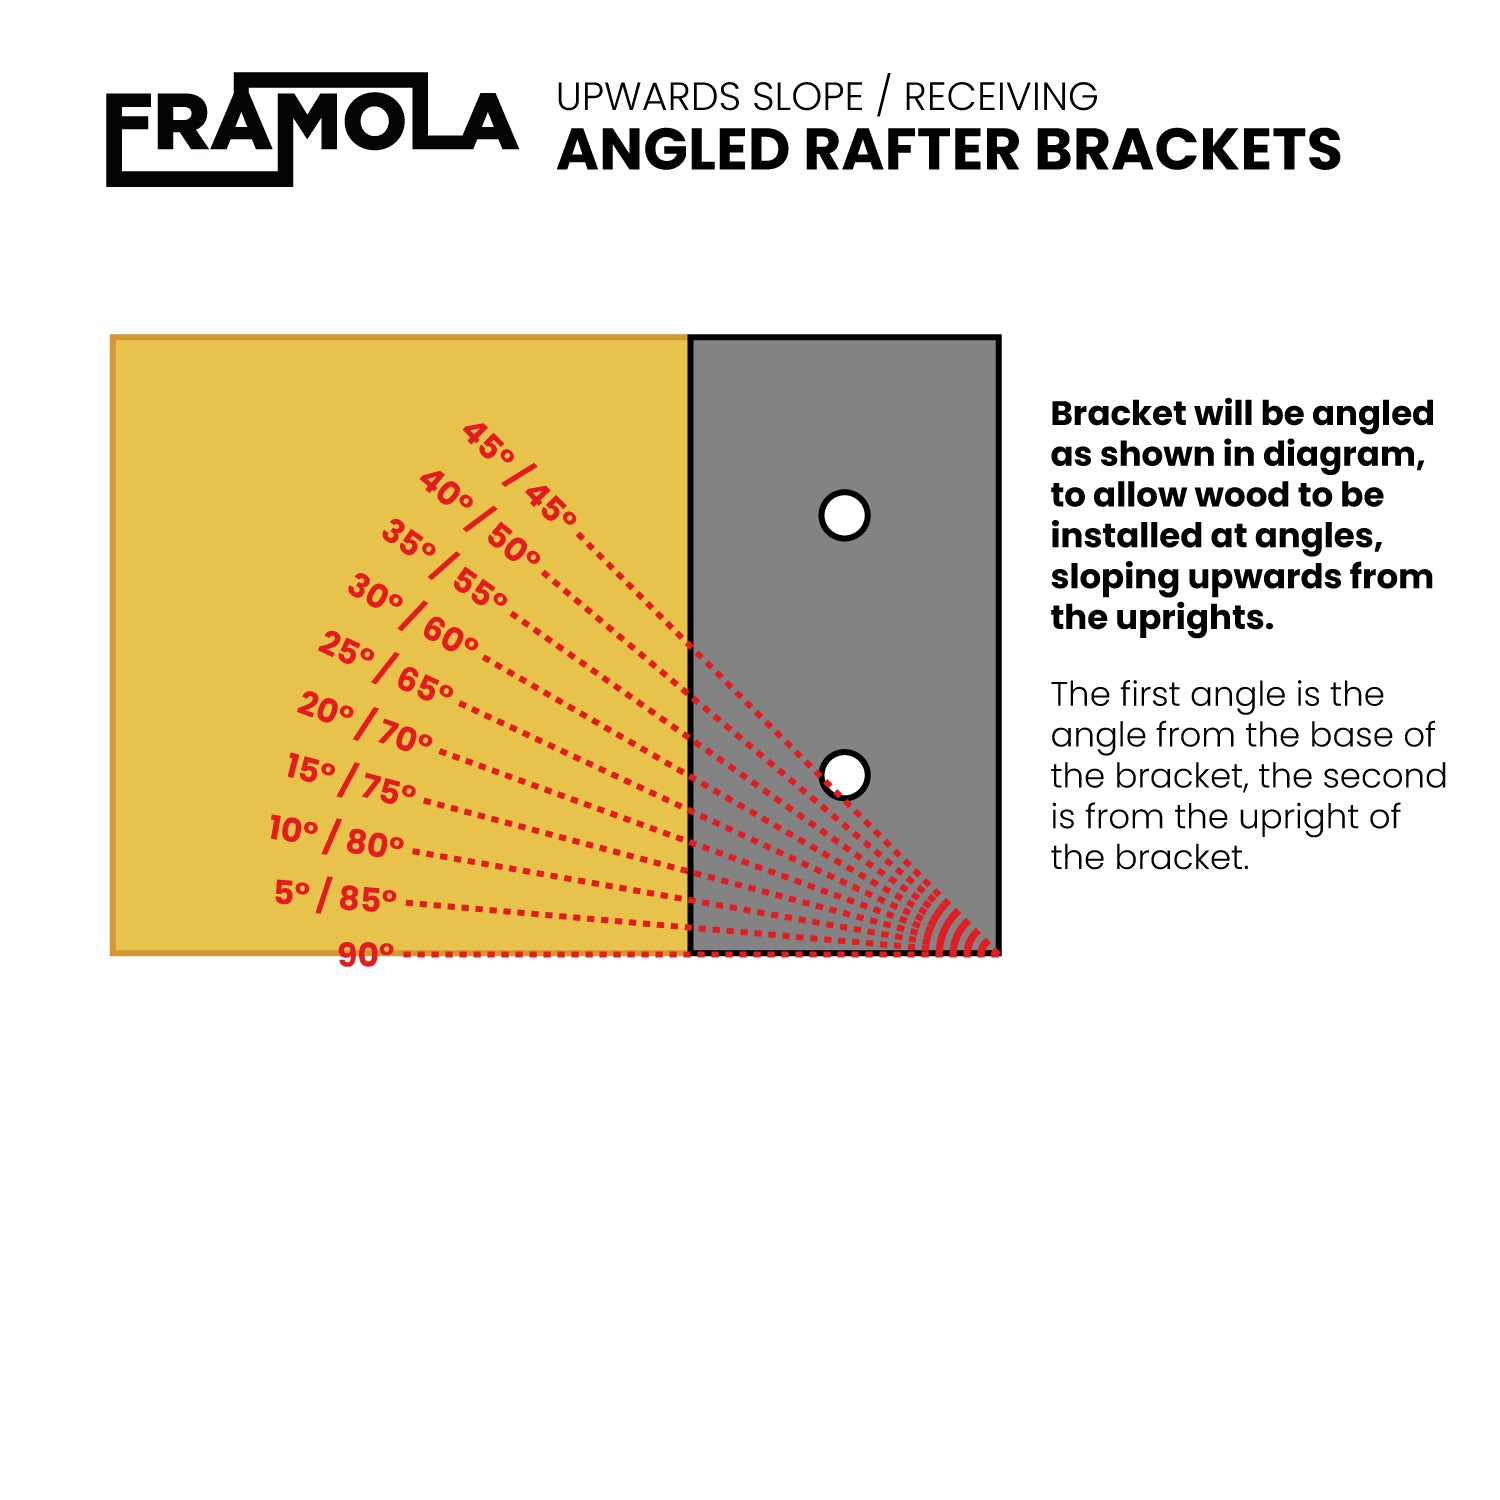 Framola Upwards Angled Rafter Brackets - For Receiving Ends of Sloped Rafters (90 Options Available)